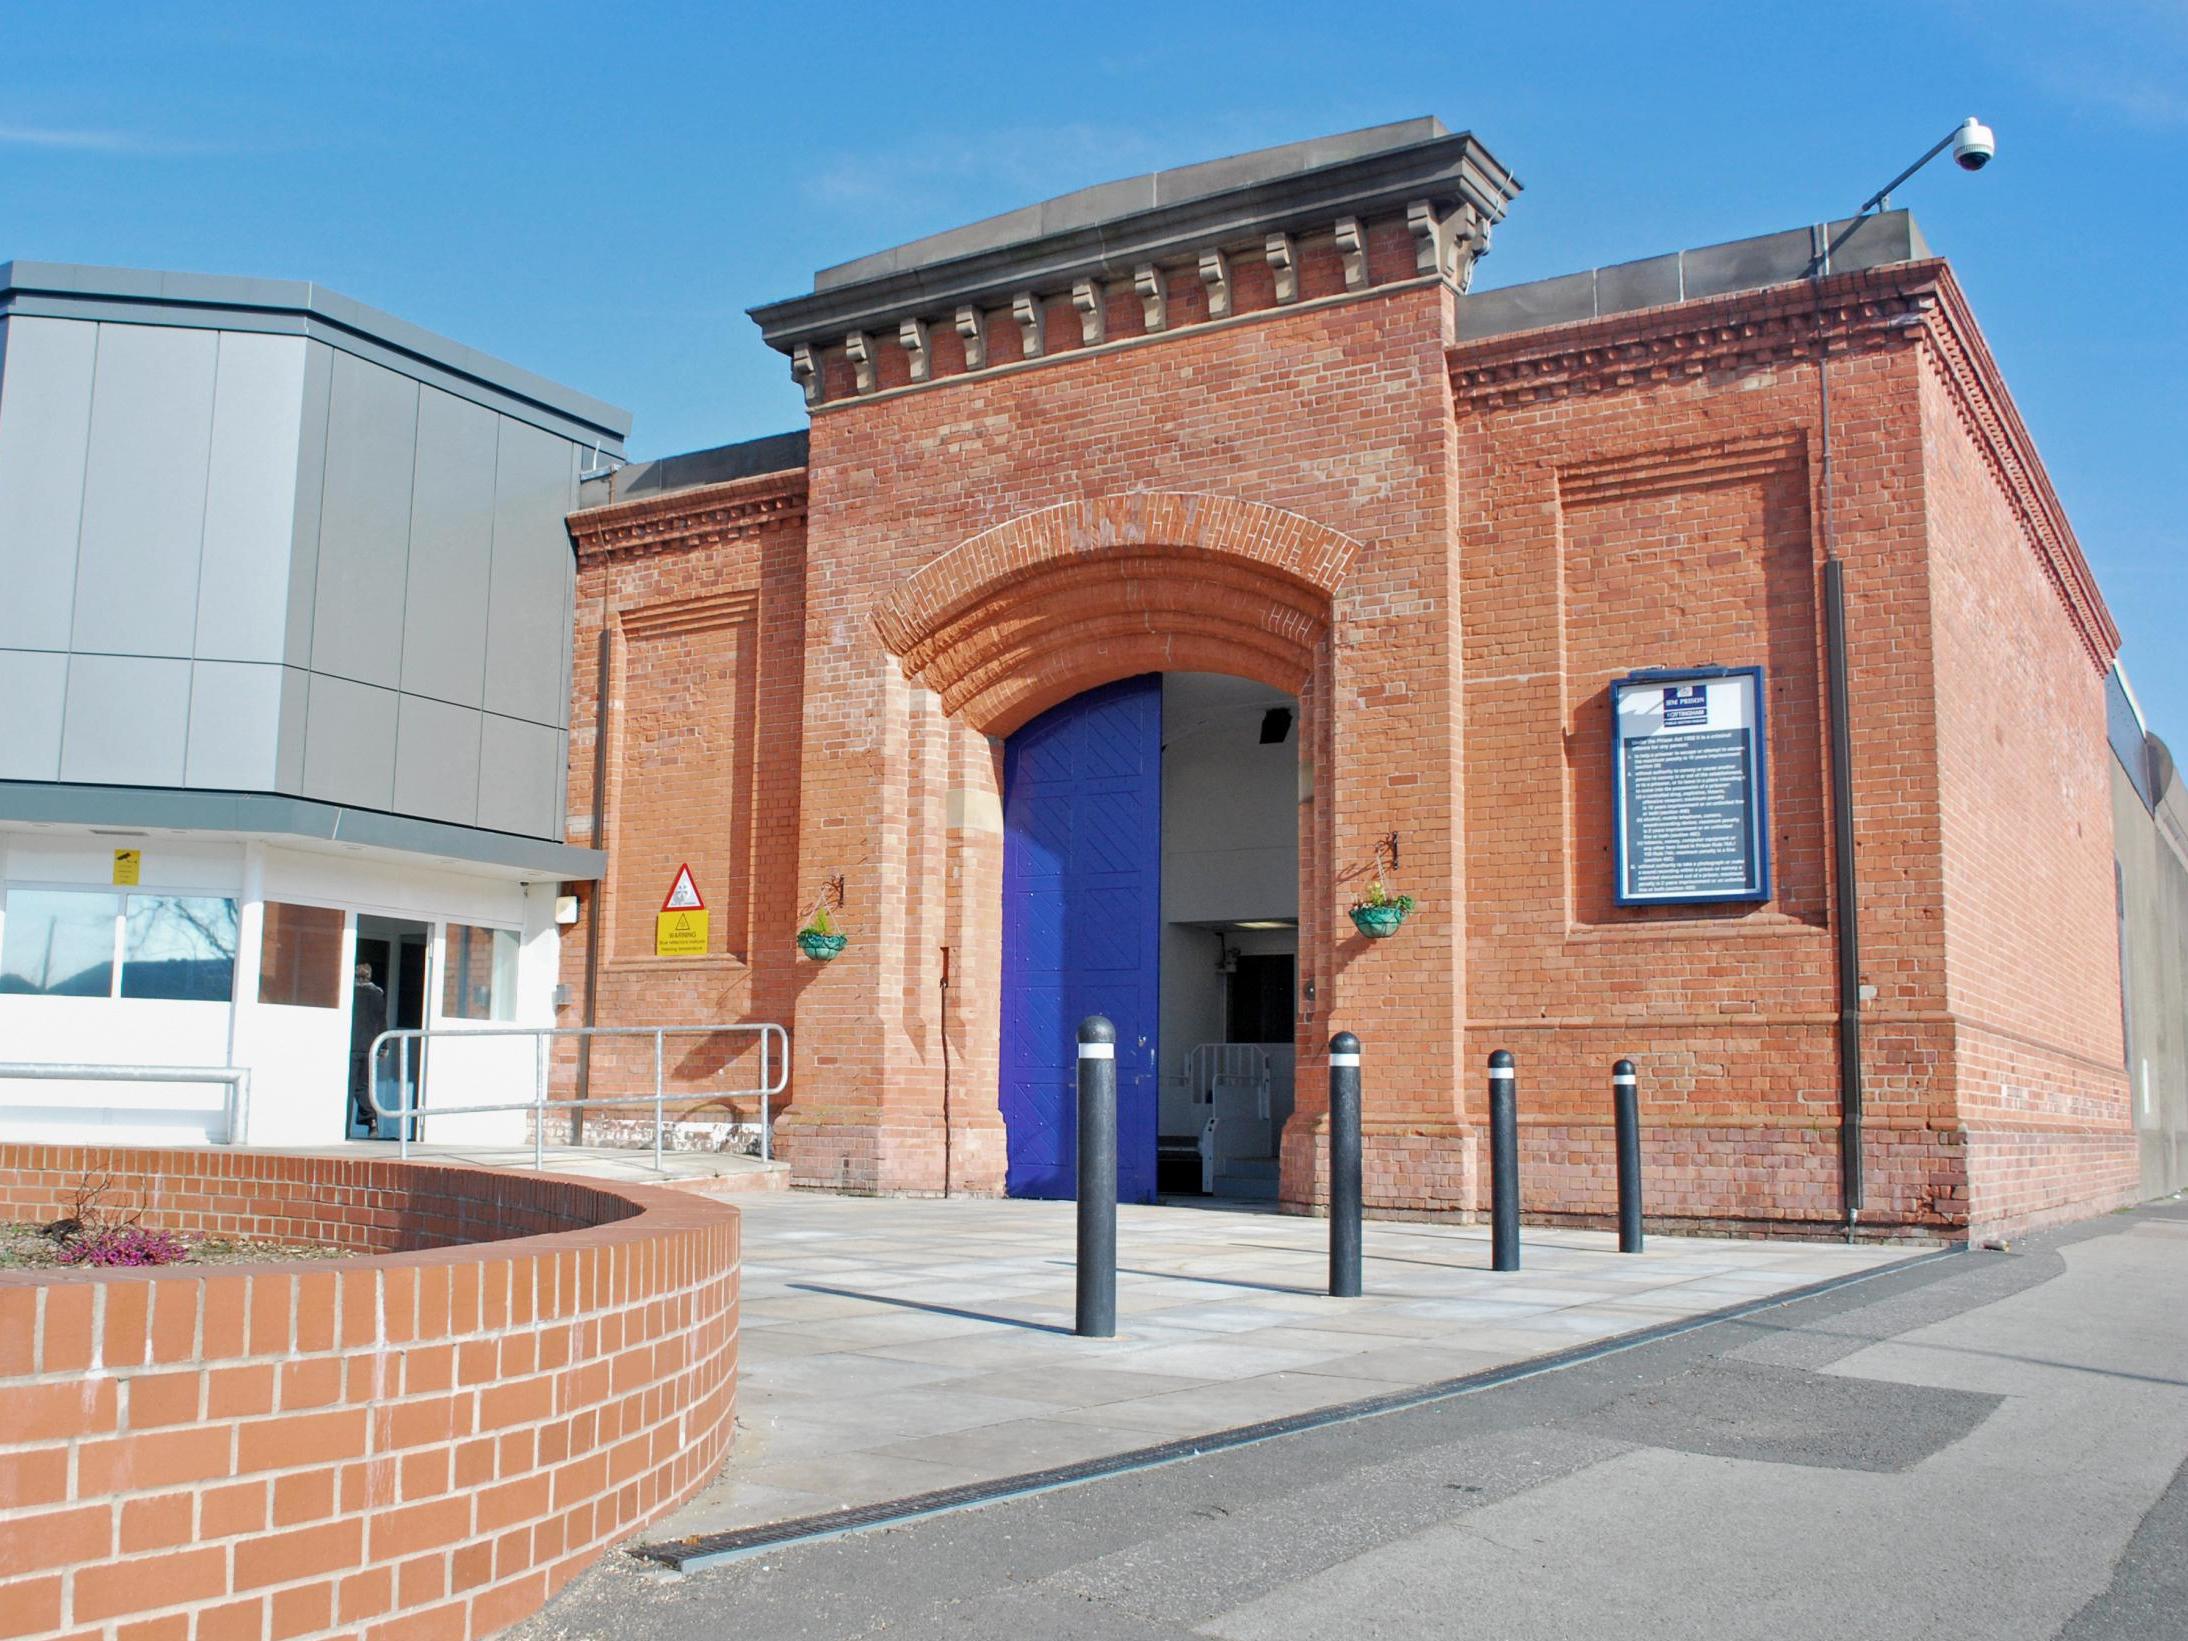 HMP Nottingham was declared an "unsafe" facility last year